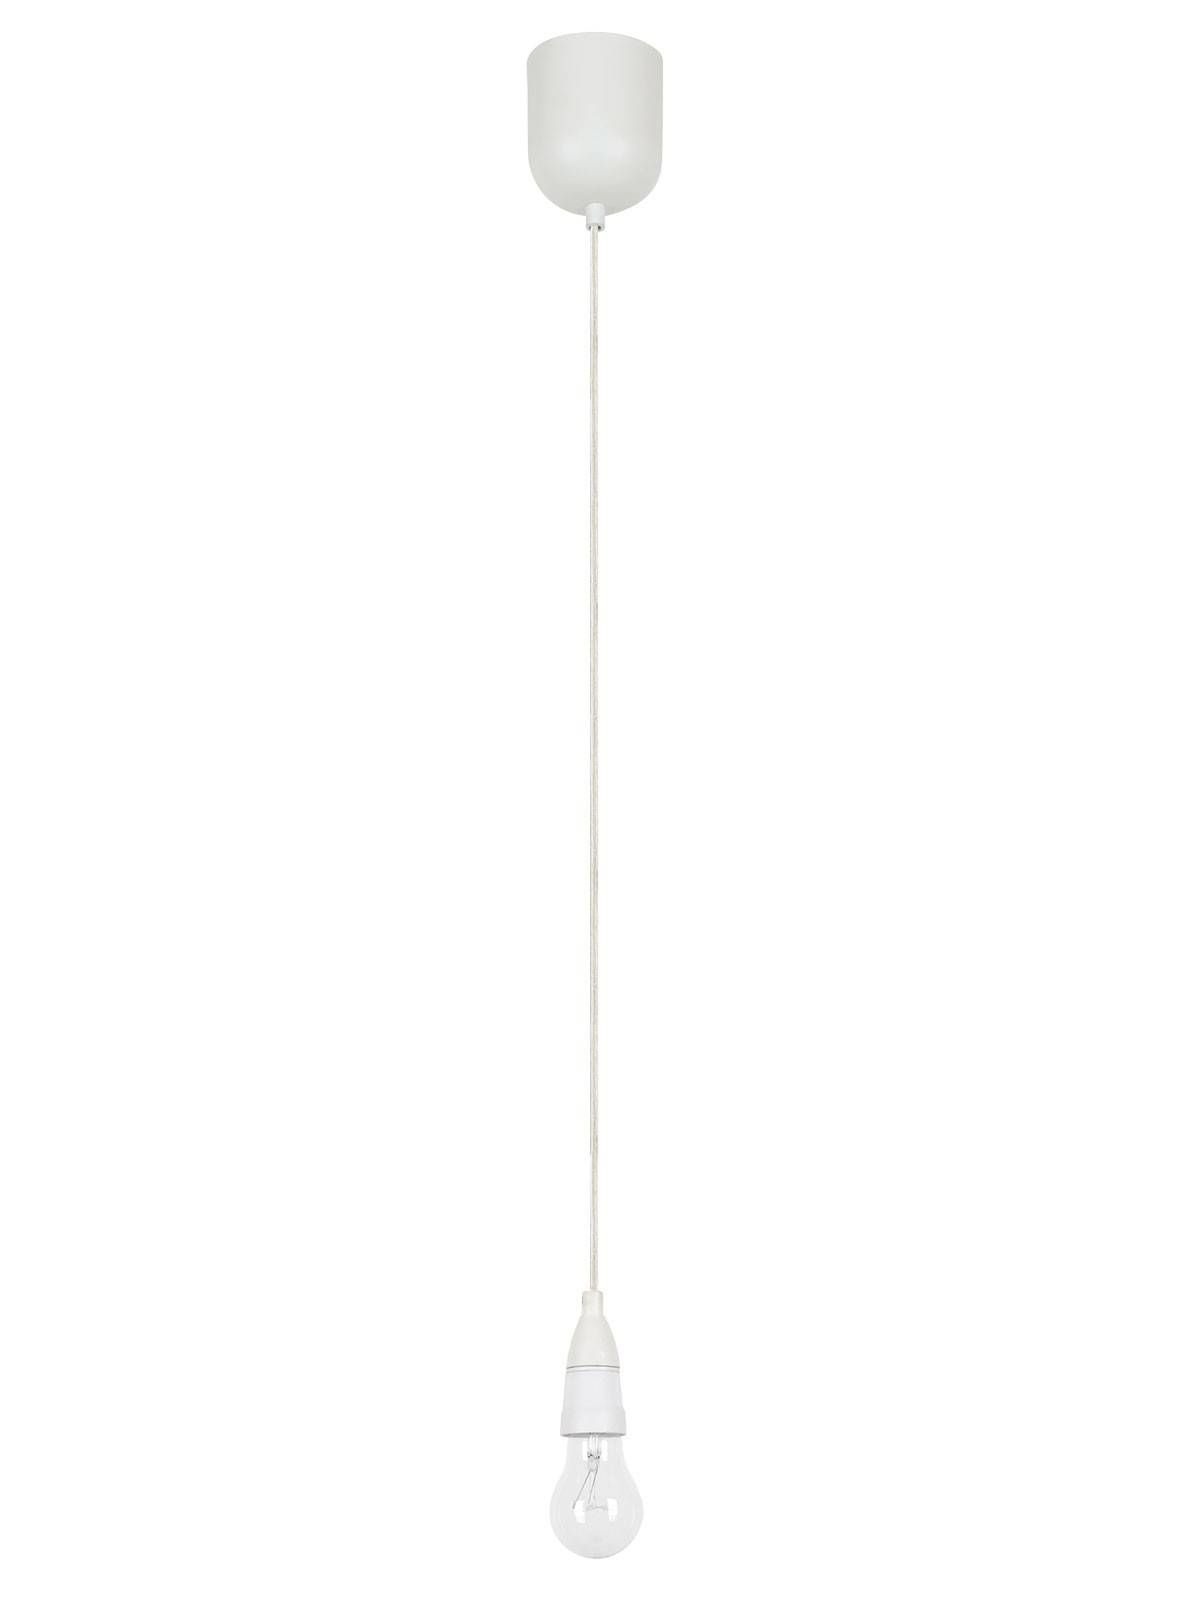 Darly Diy Batten Fix Suspension Cord In White For Diy Suspension Cord Pendant Lights (View 12 of 15)